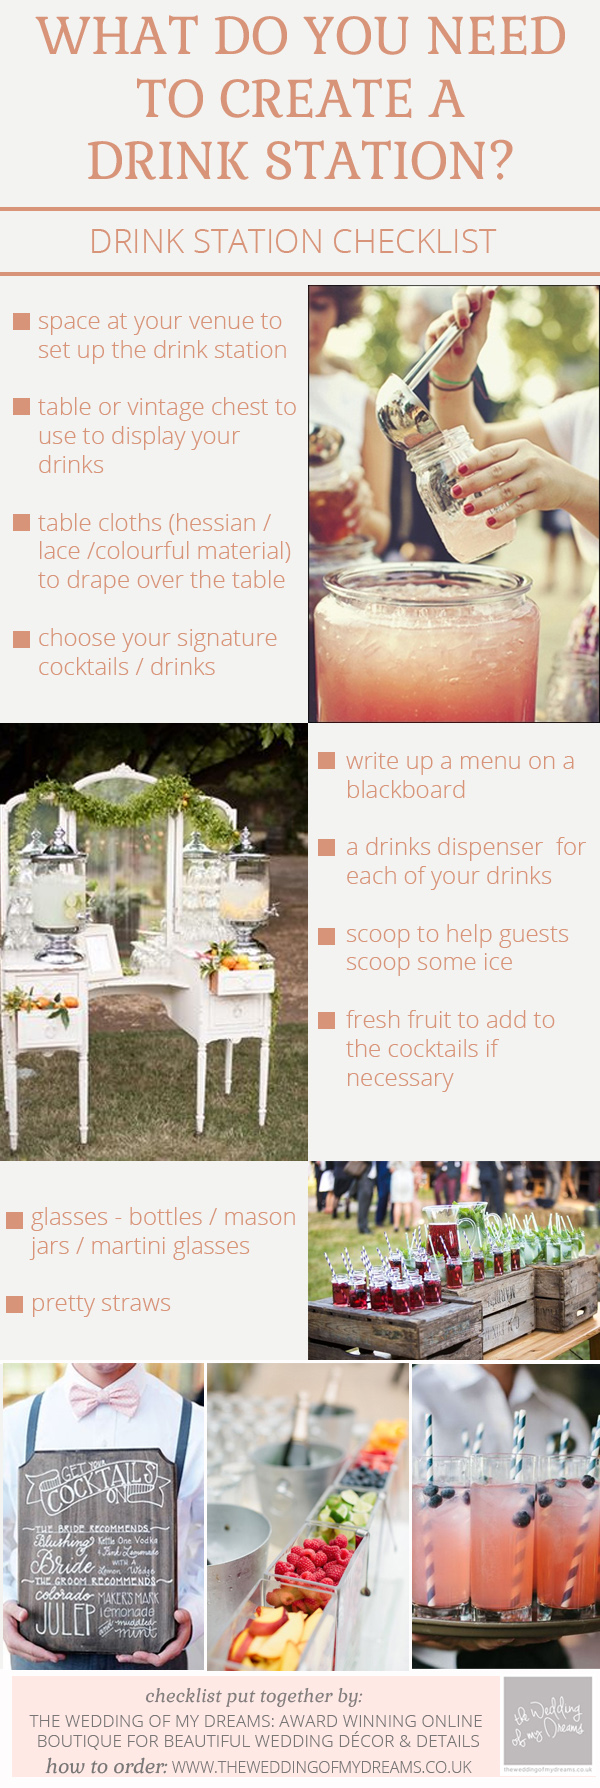 6 Wedding Checklist Templates for Rustic, Beach and ...